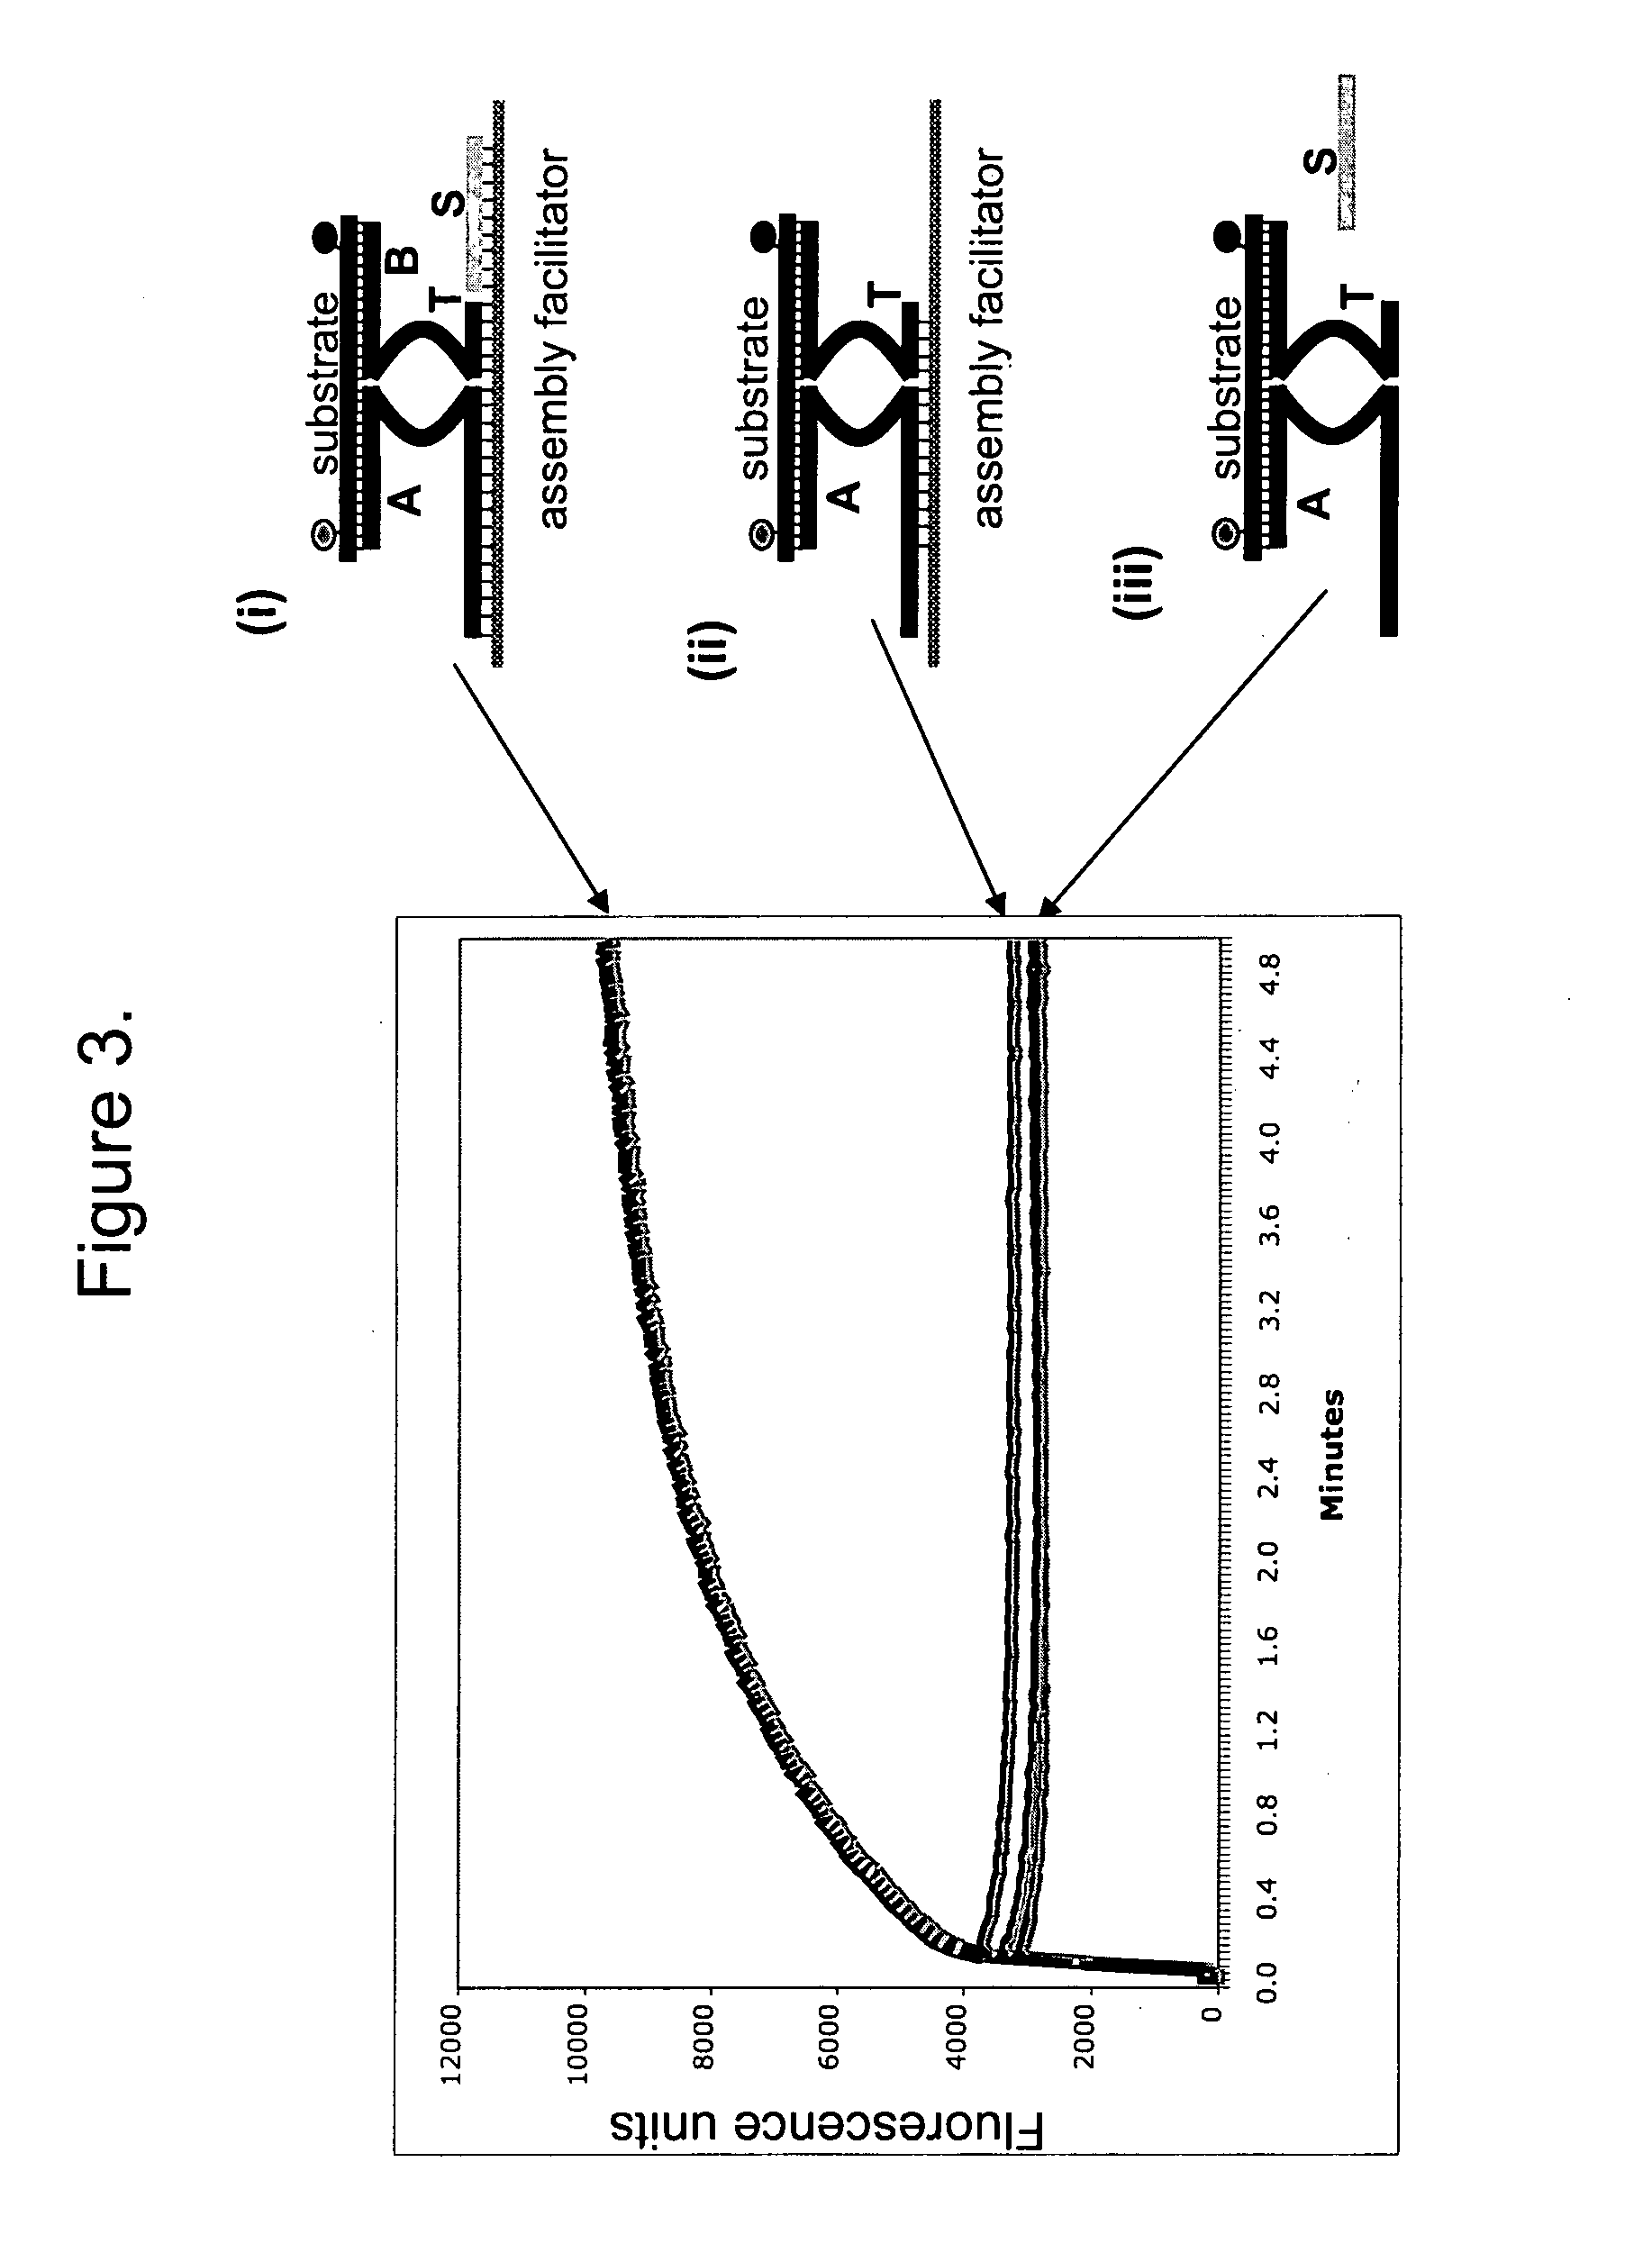 Nucleic acid enzymes and complexes and methods for their use